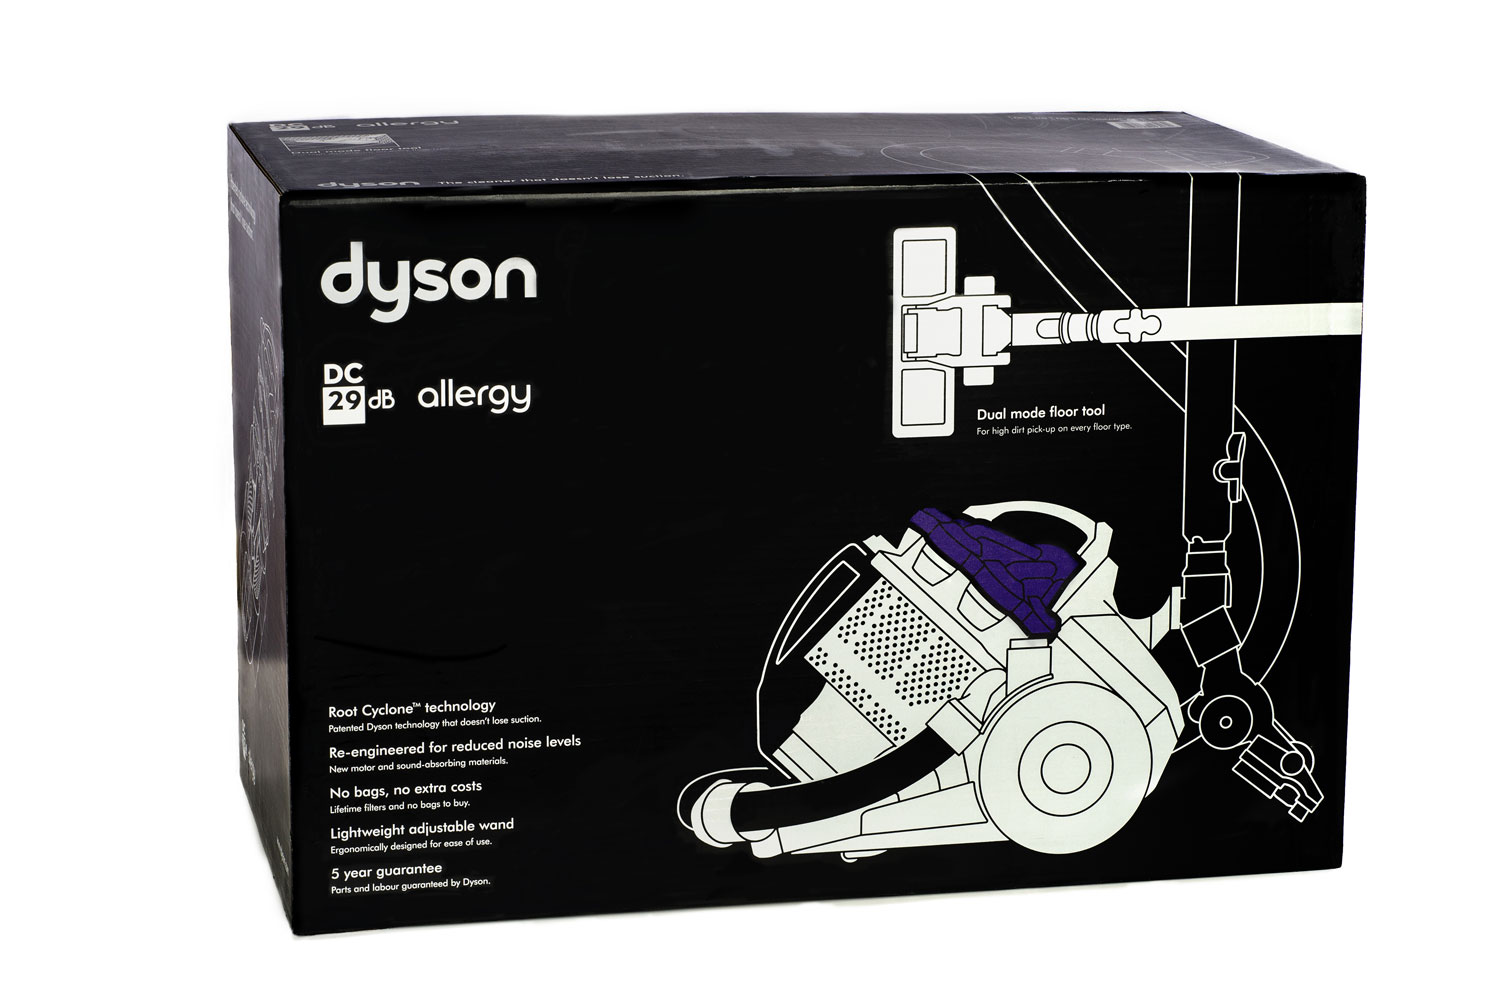 A box of a brand new Dyson Vacuum cleaner